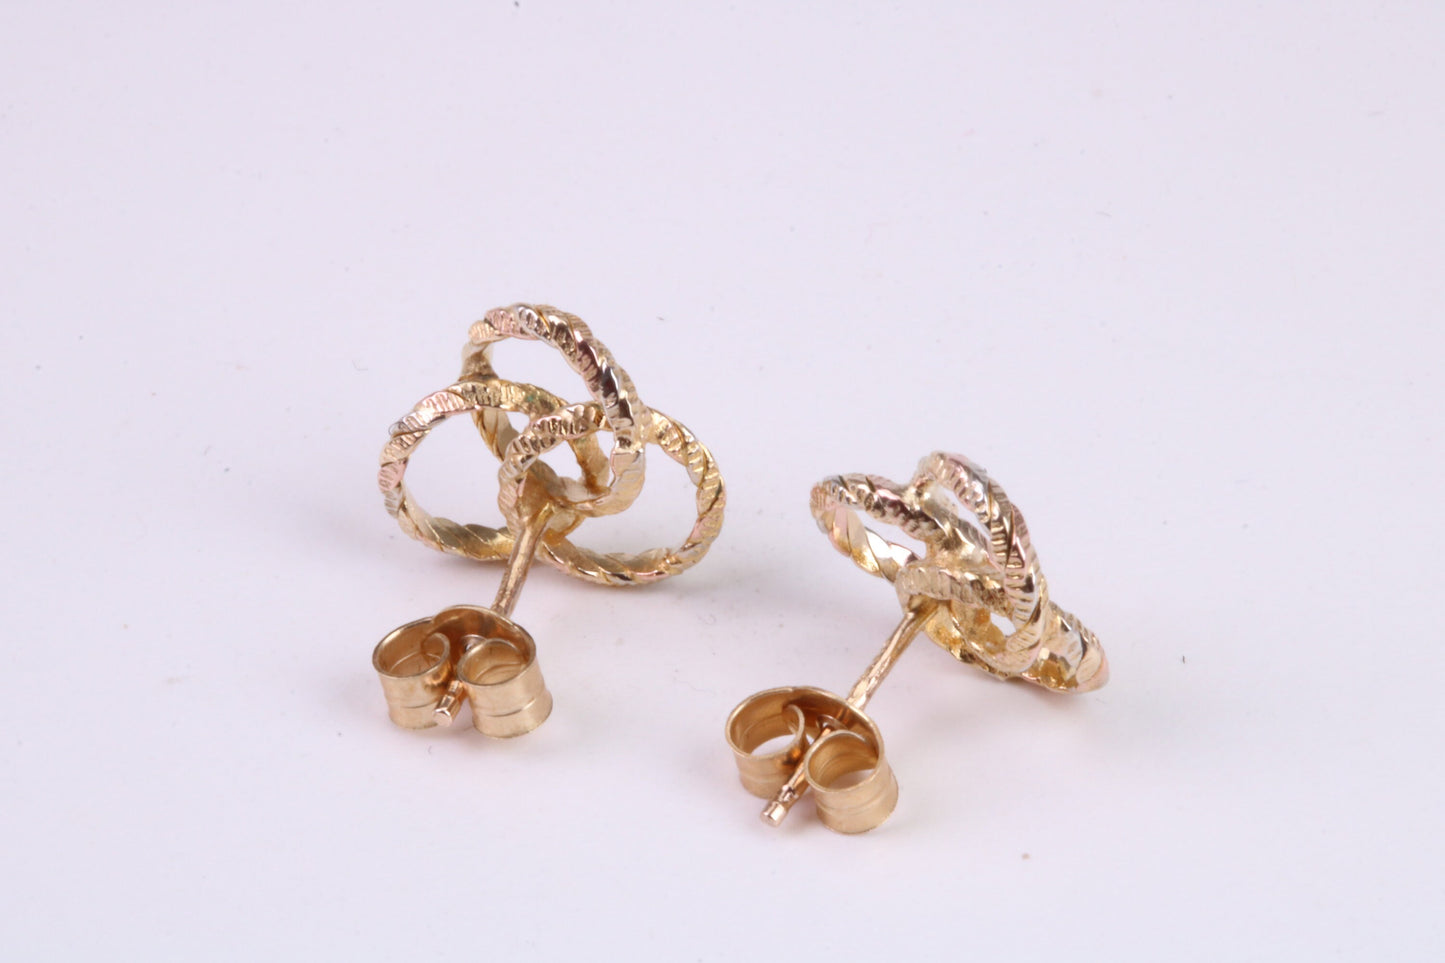 10 mm Round Triple Hoop Stud Earrings Made from Yellow Gold